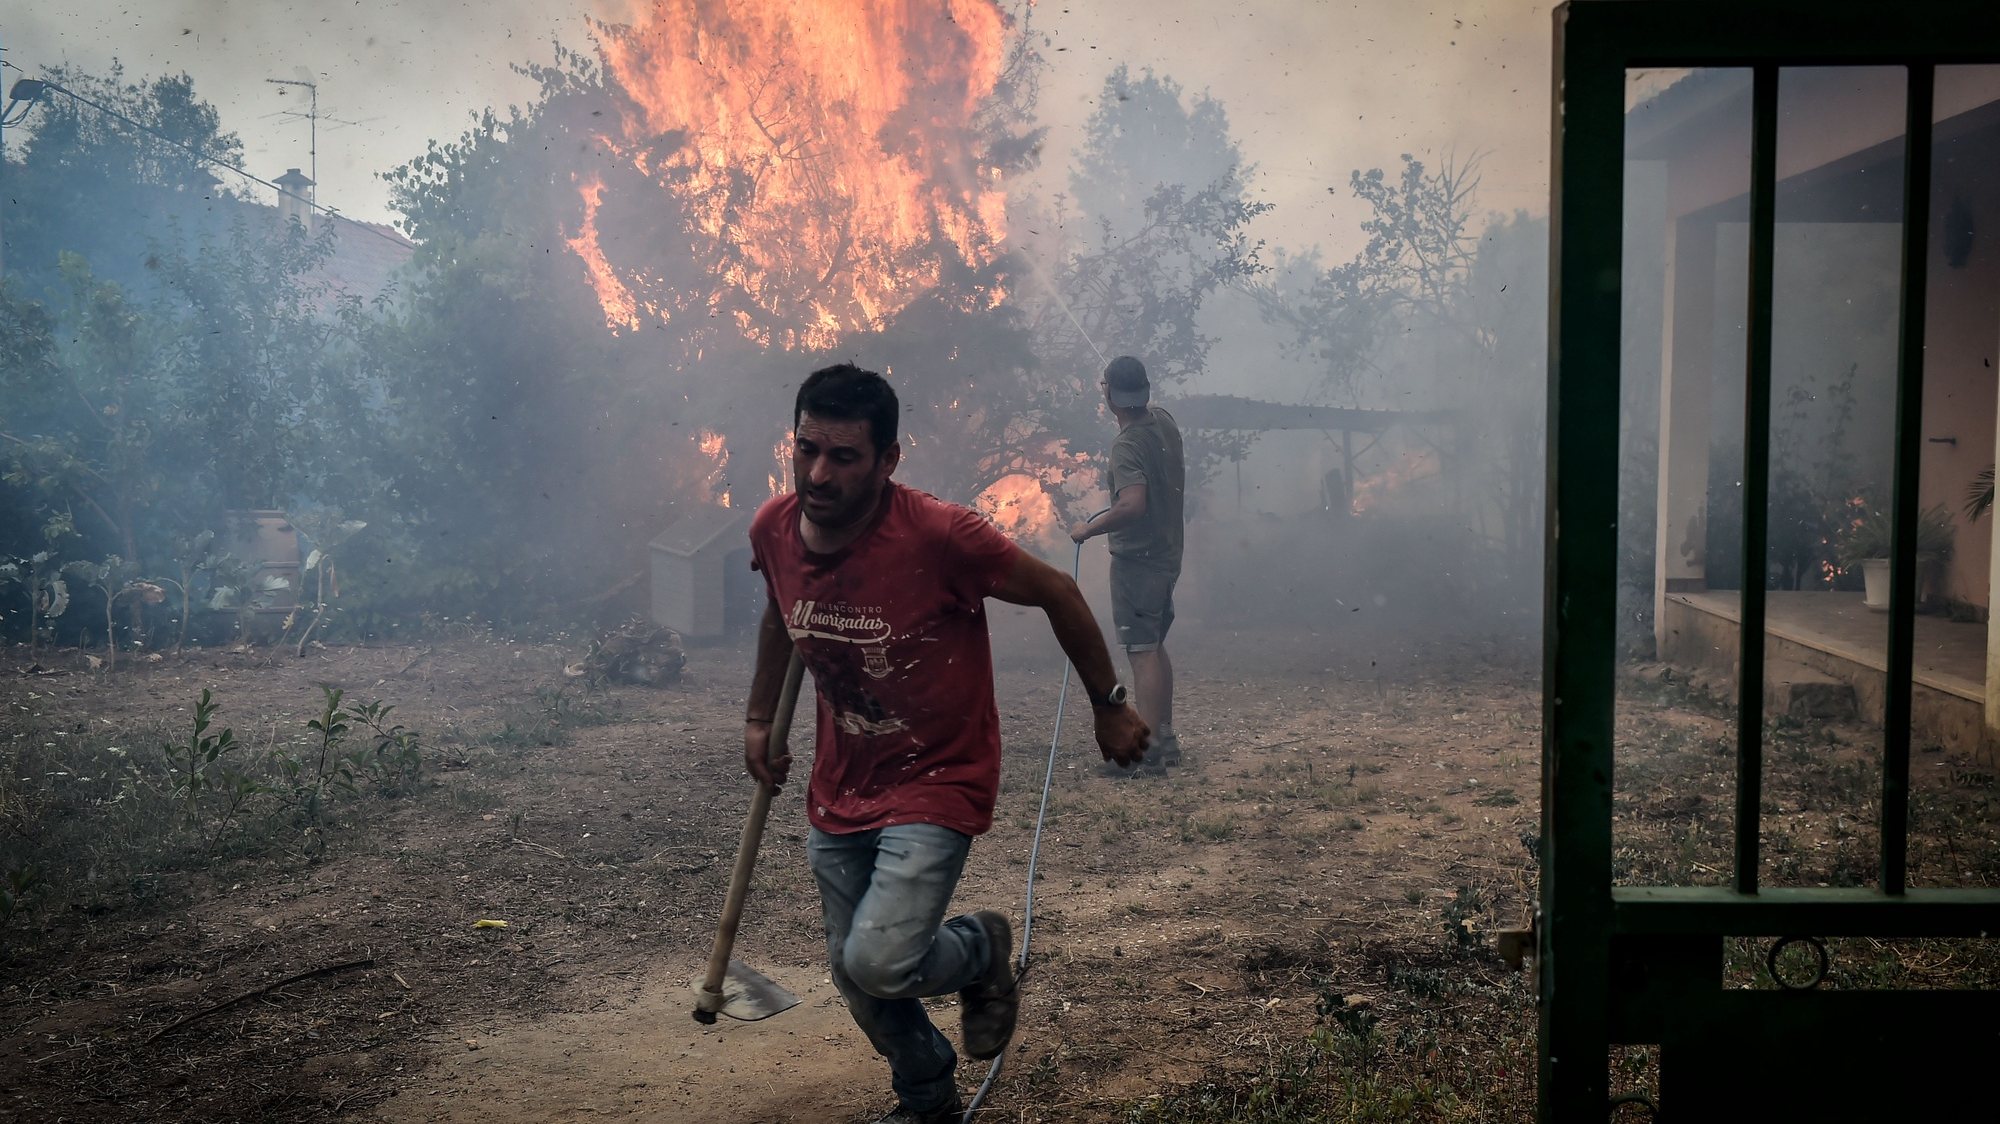 Men fight a wildfire burning in the village of Aventeira, Alvaiázere, Portugal, July 12, 2022. The fire that cutted the A1 highway between Pombal and Leiria and surrounded the village of Aventeira (Alvaiázere) has 350 operatives, supported by 103 vehicles and two aircraft. NUNO ANDRE FERREIRA/LUSA